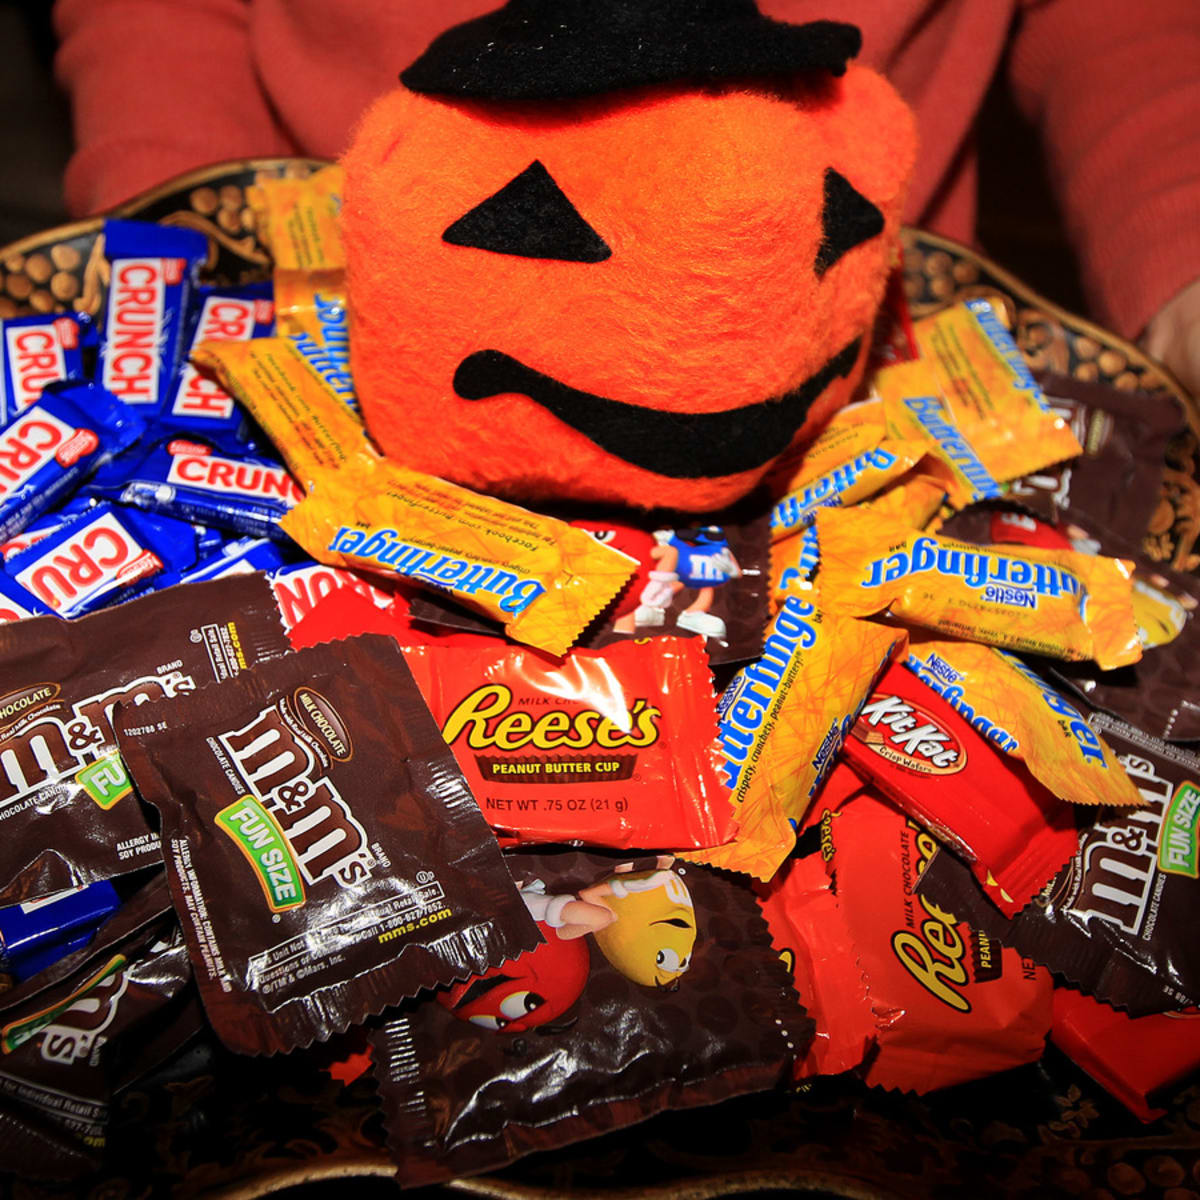 The official Halloween candy power rankings - Los Angeles Times